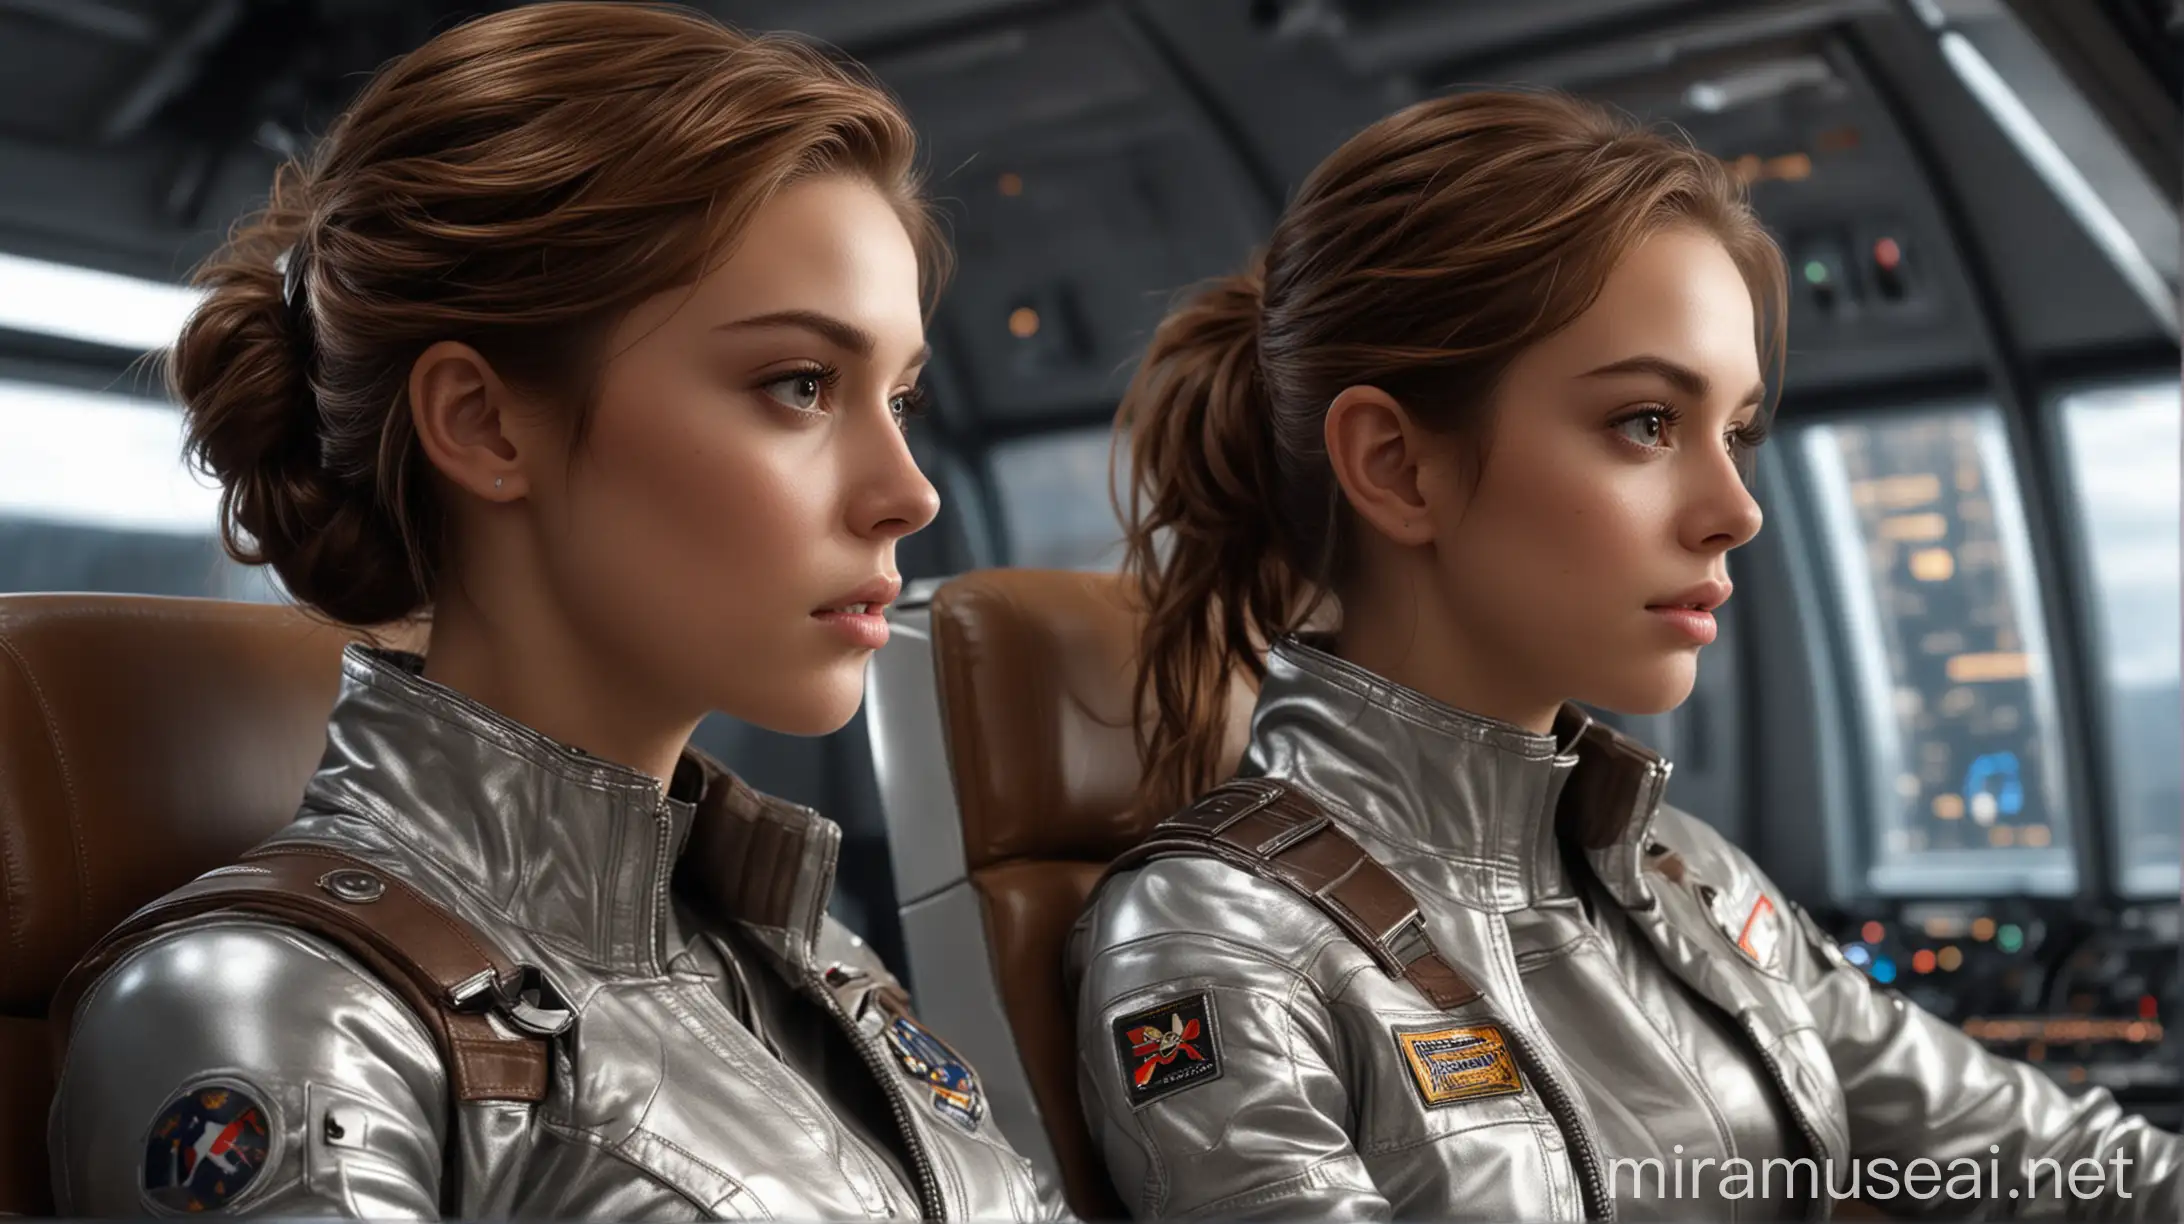 Dynamic Poses of Two 19YearOld Females in SciFi Starship Command Room